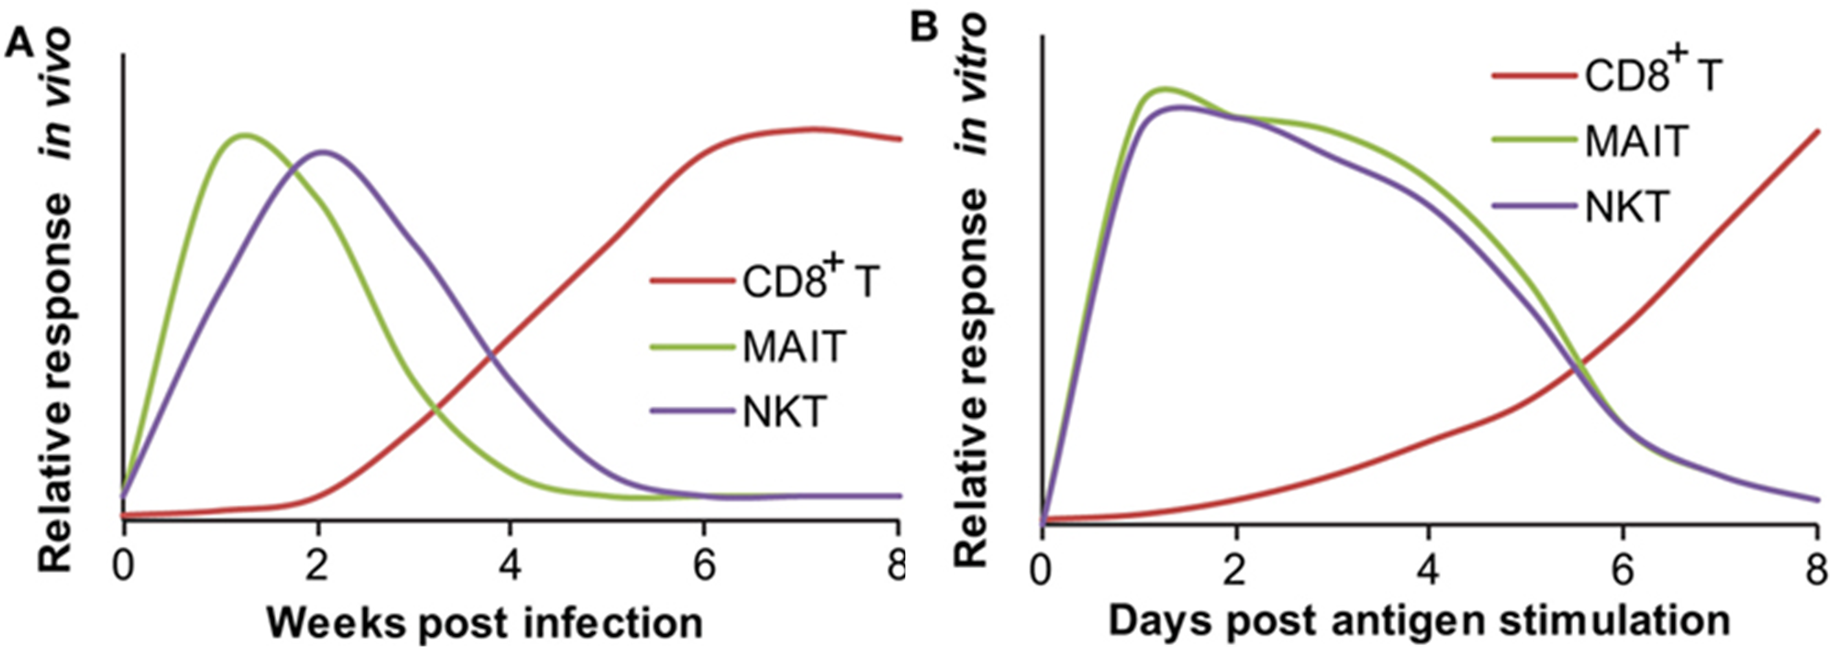 Diagrams - RESPONDING KINETICS OF MUCOSAL-ASSOCIATED INVARIANT T (MAIT) AND NATURAL KILLER T (NKT) CELLS.